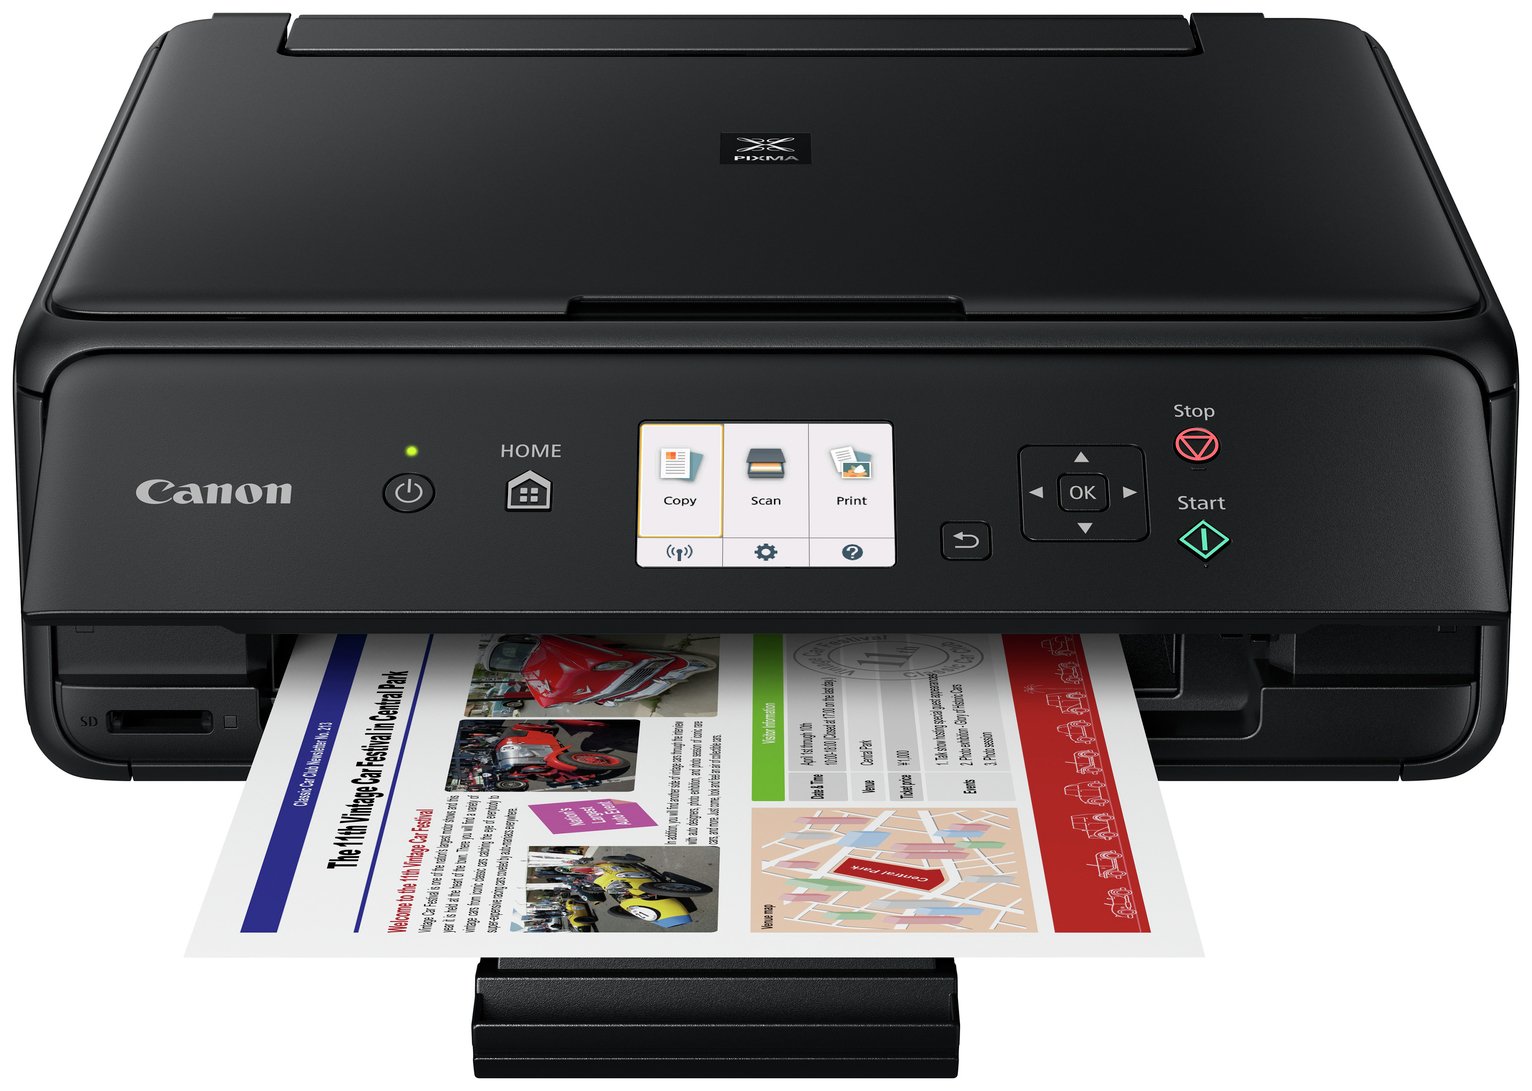 How To Print Photos From Smartphone Canon Pixma TS5050 Printer 